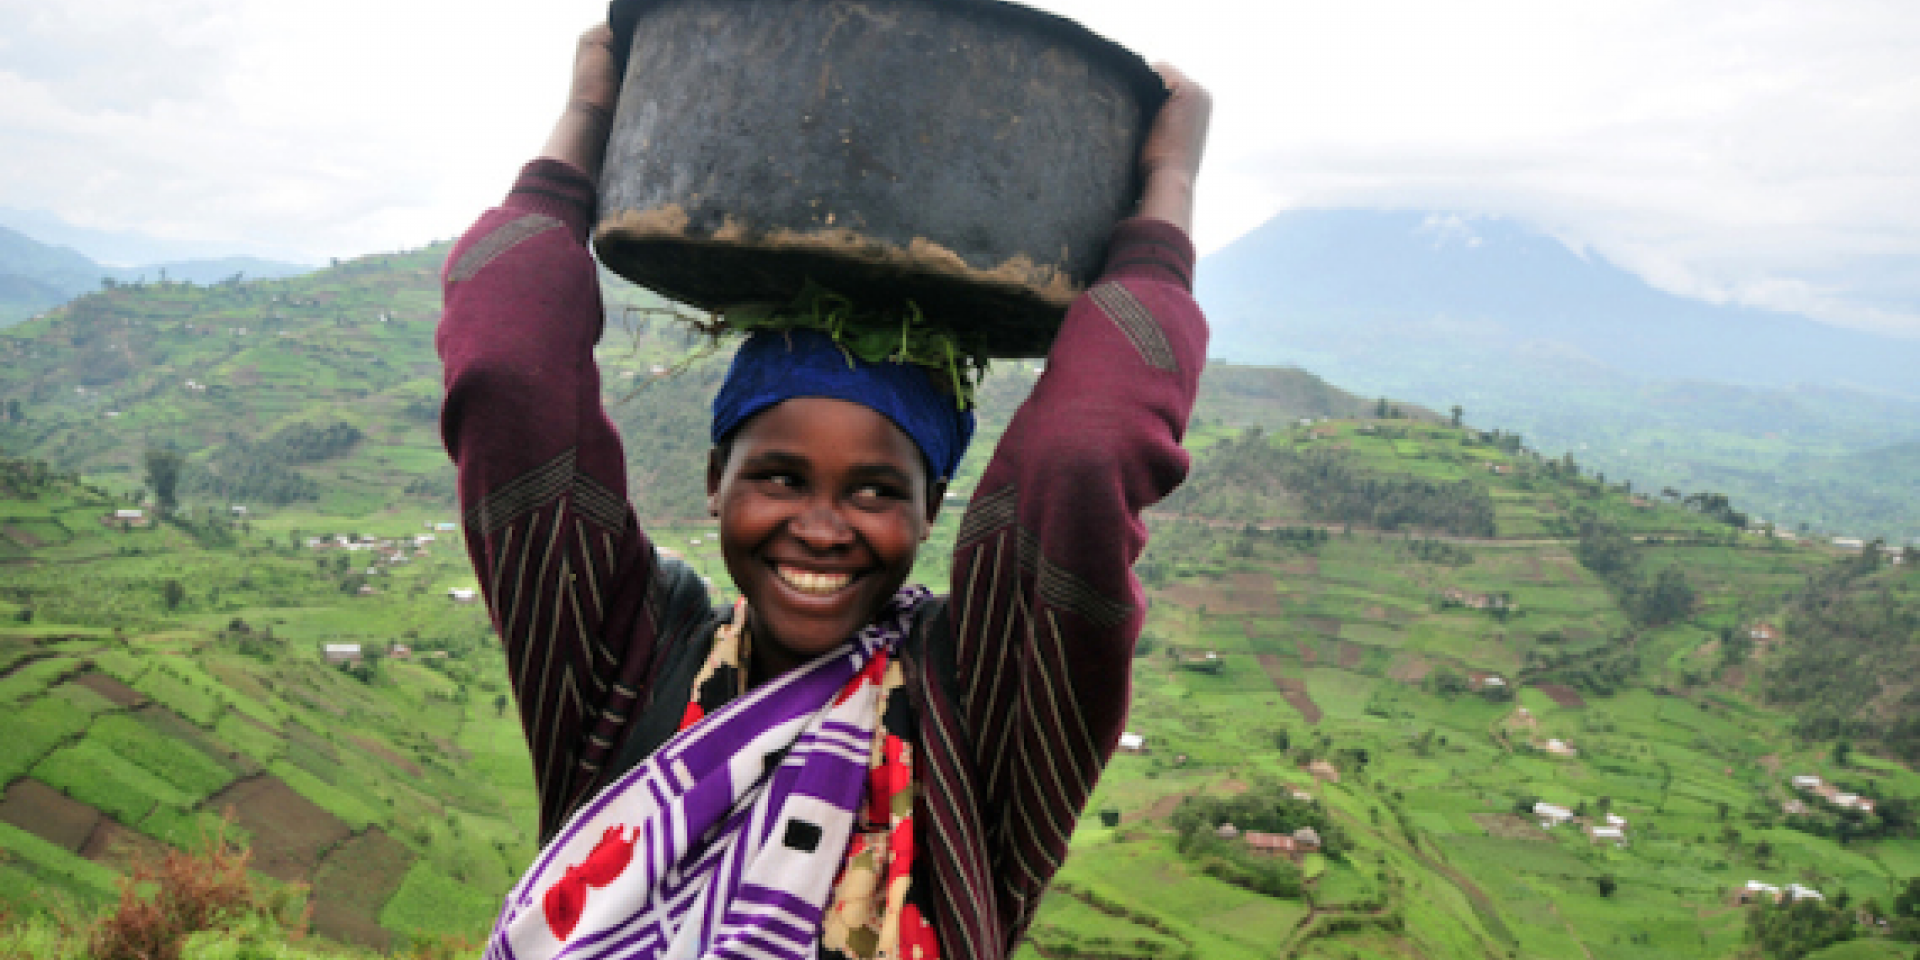 Debunking the myth of female labor in African agriculture